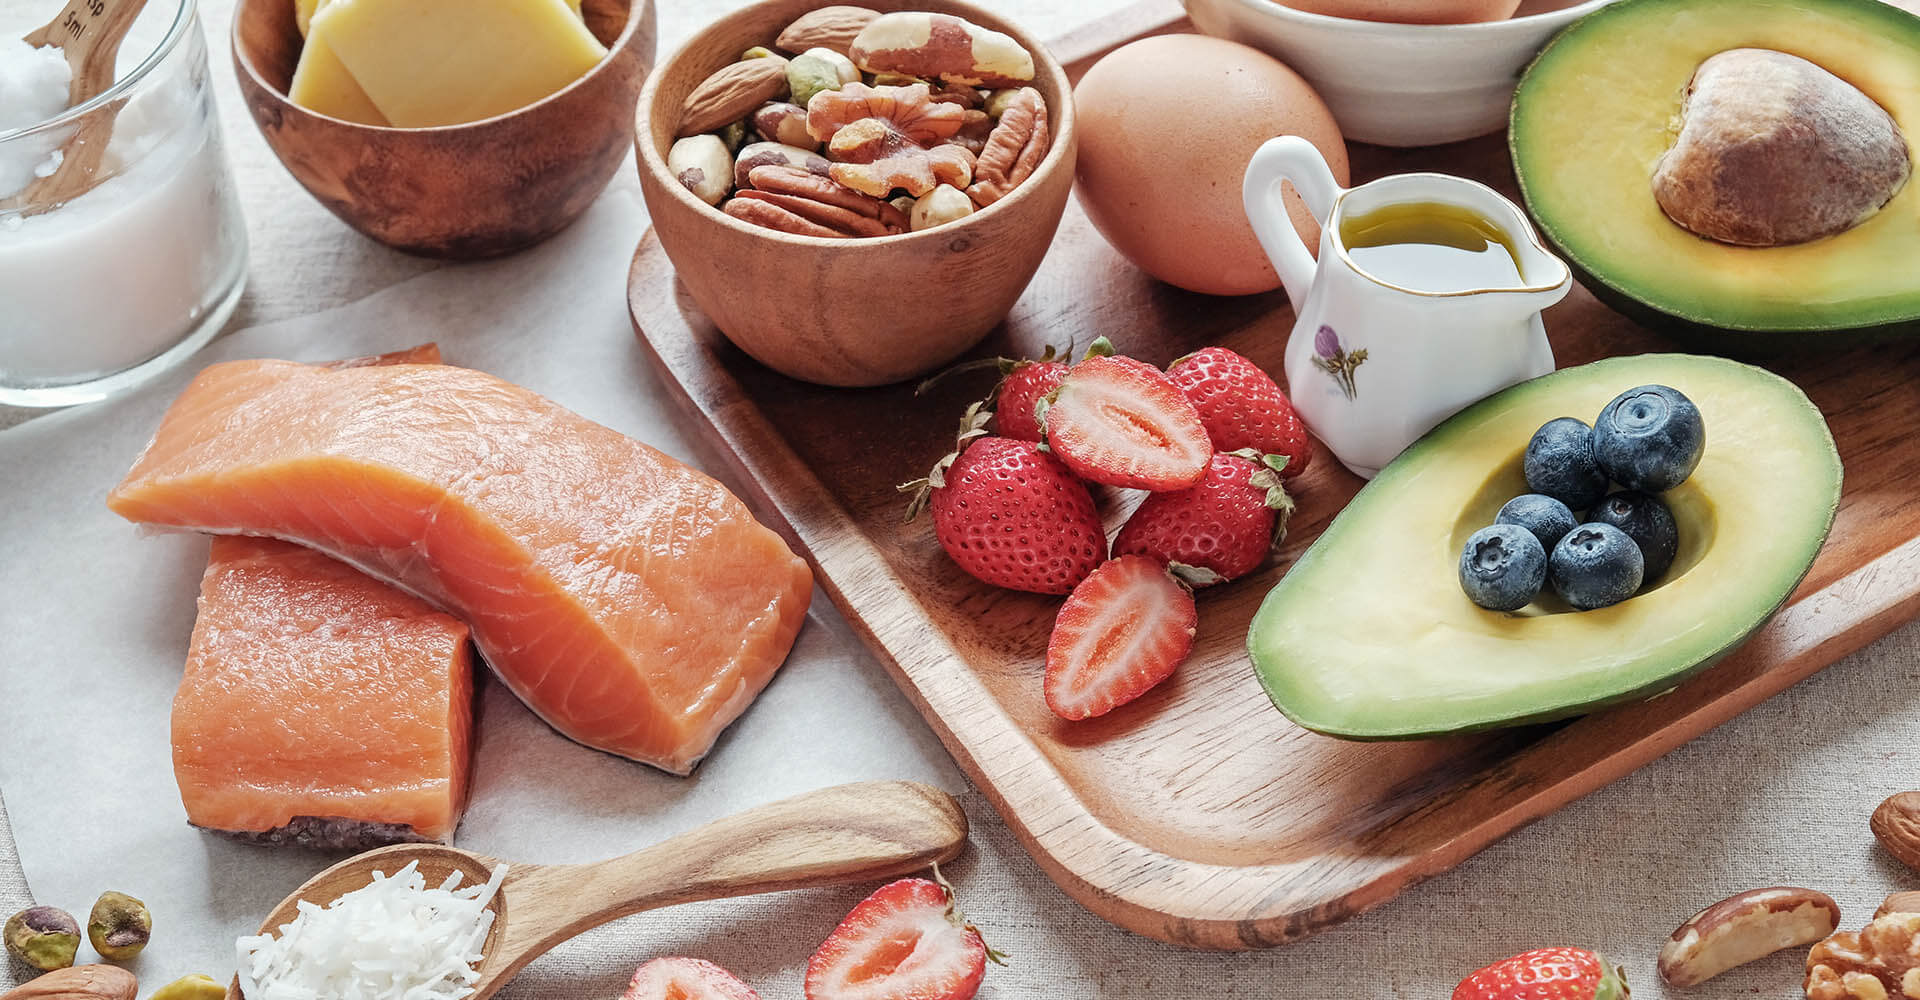 Many classic ingredients of a ketogenic diet such as salmon, fruits, nuts and eggs